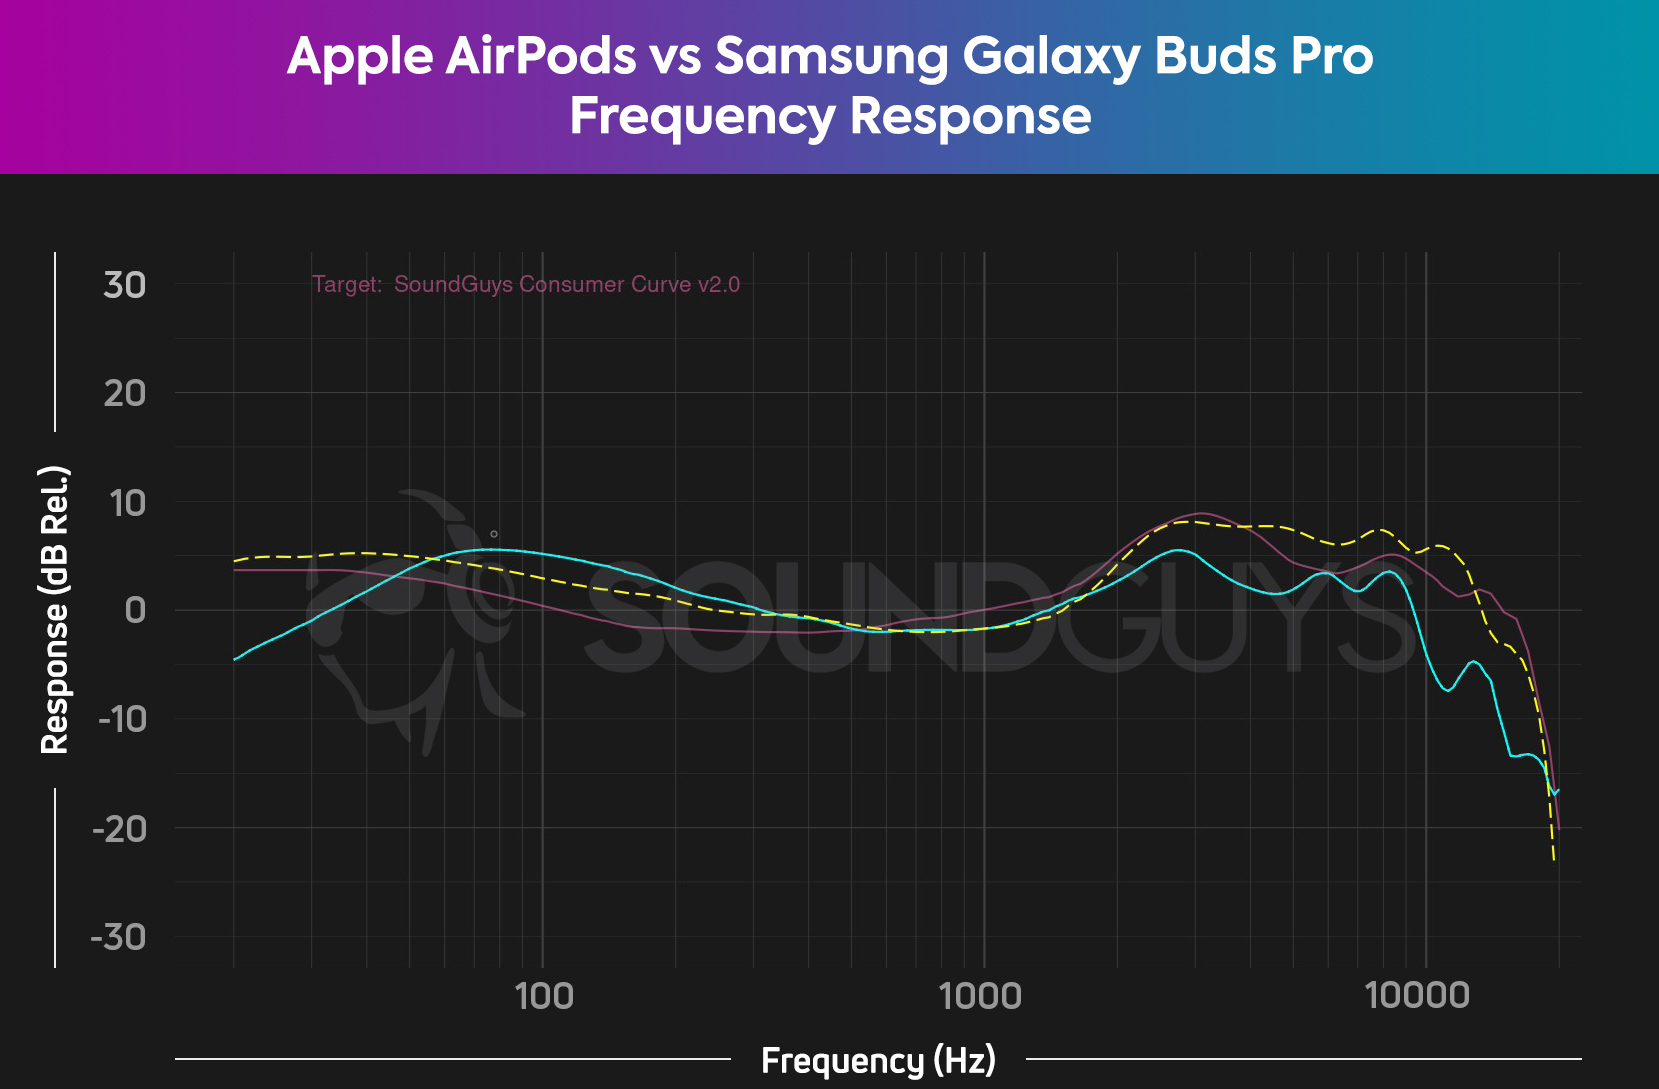 A chart showing the frequency responses of the Apple AirPods and Samsung Galaxy Buds Pro compared to the SoundGuys' house curve.